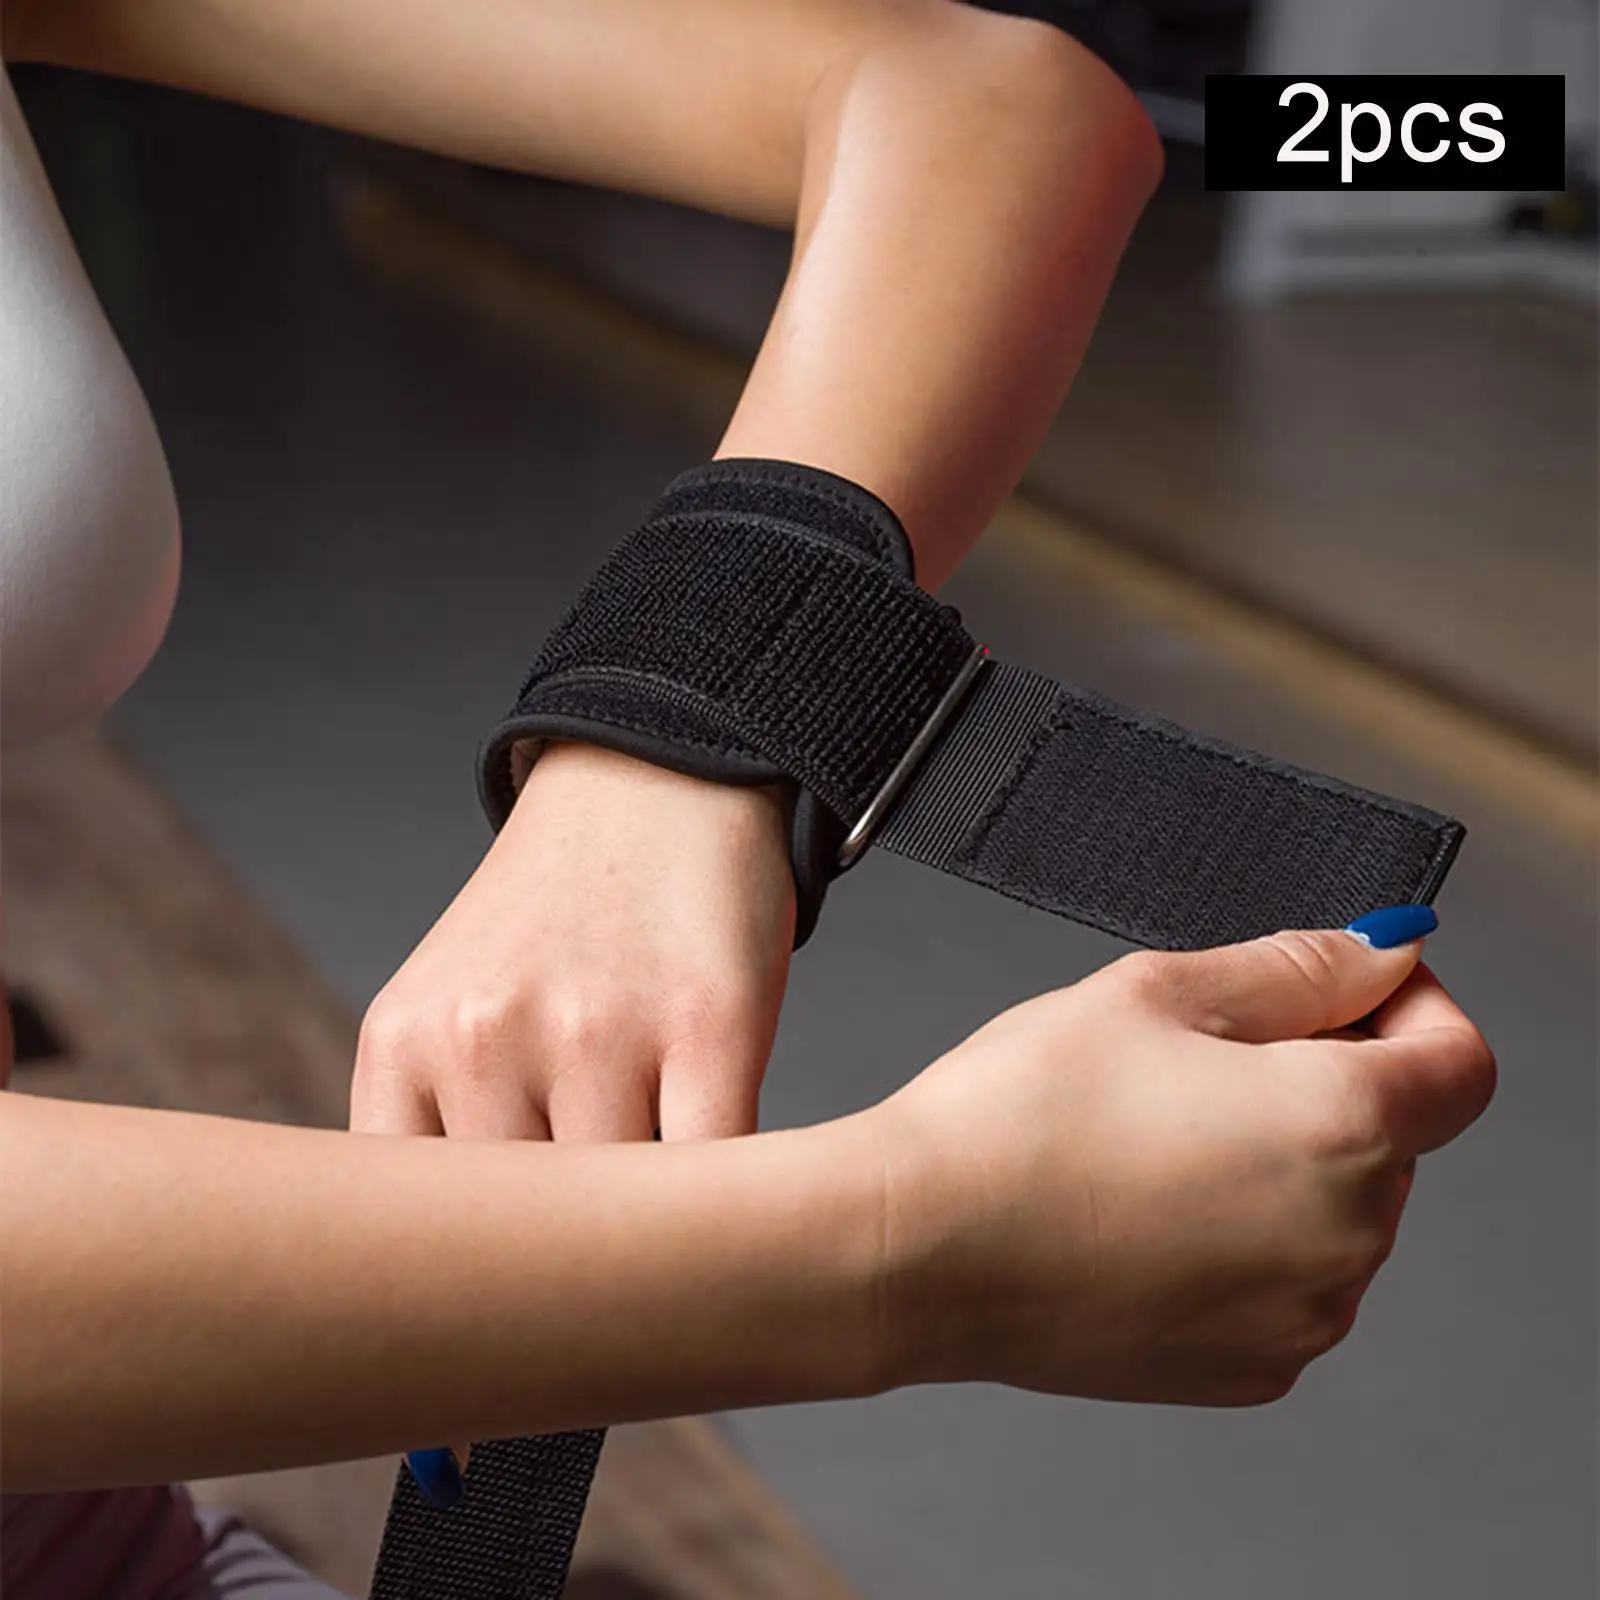 2x Weight Lifting Straps Wrist Support Protective Gear workout